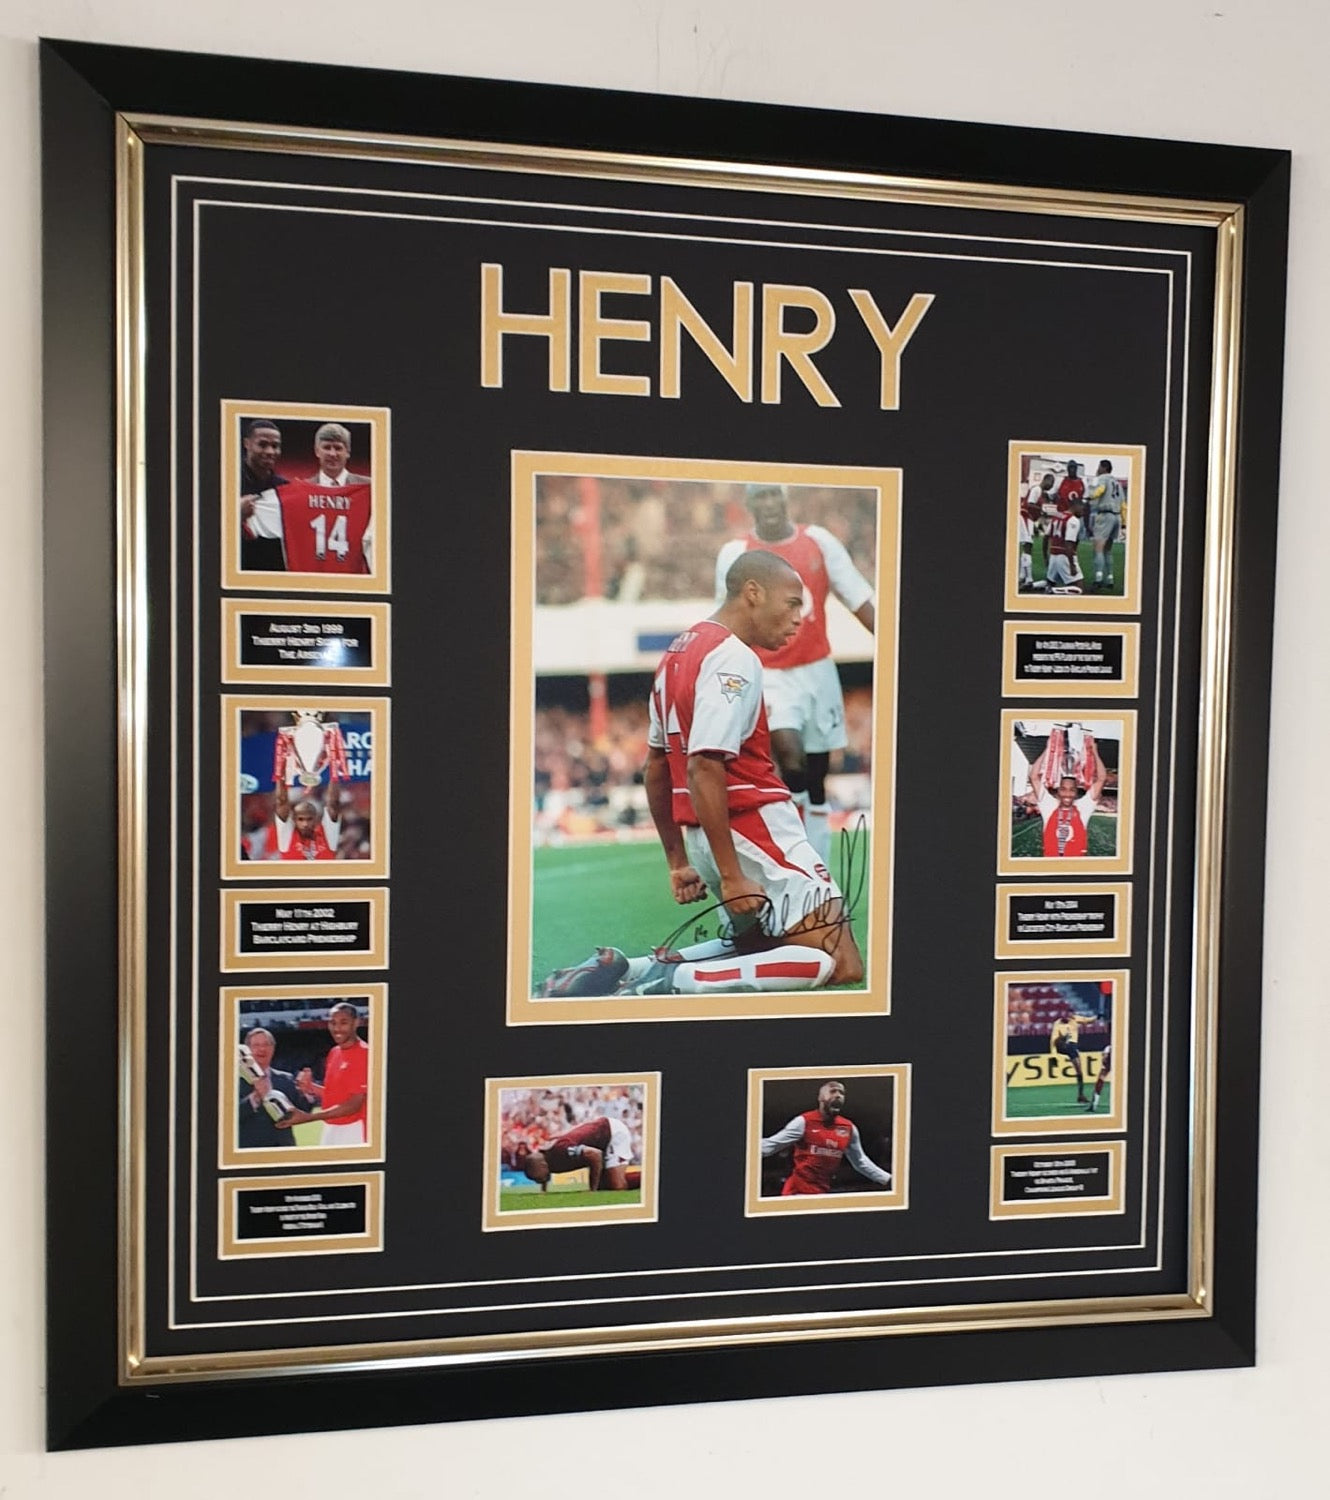 Henry Signed montage